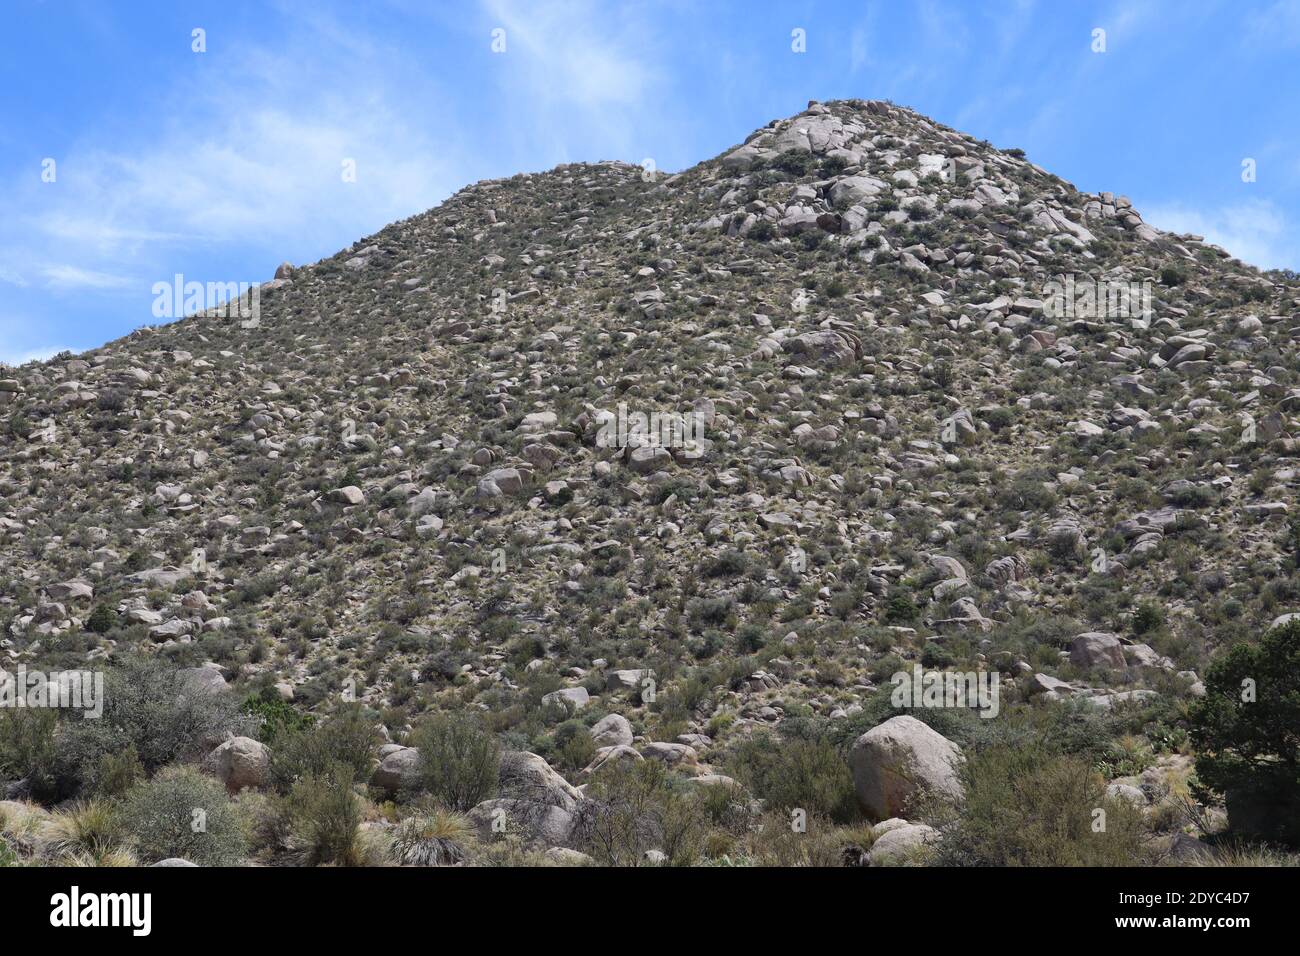 A mountain landscape with boulders nearby Sandia Peak Tramway located adjacent to Albuquerque, New Mexico Stock Photo